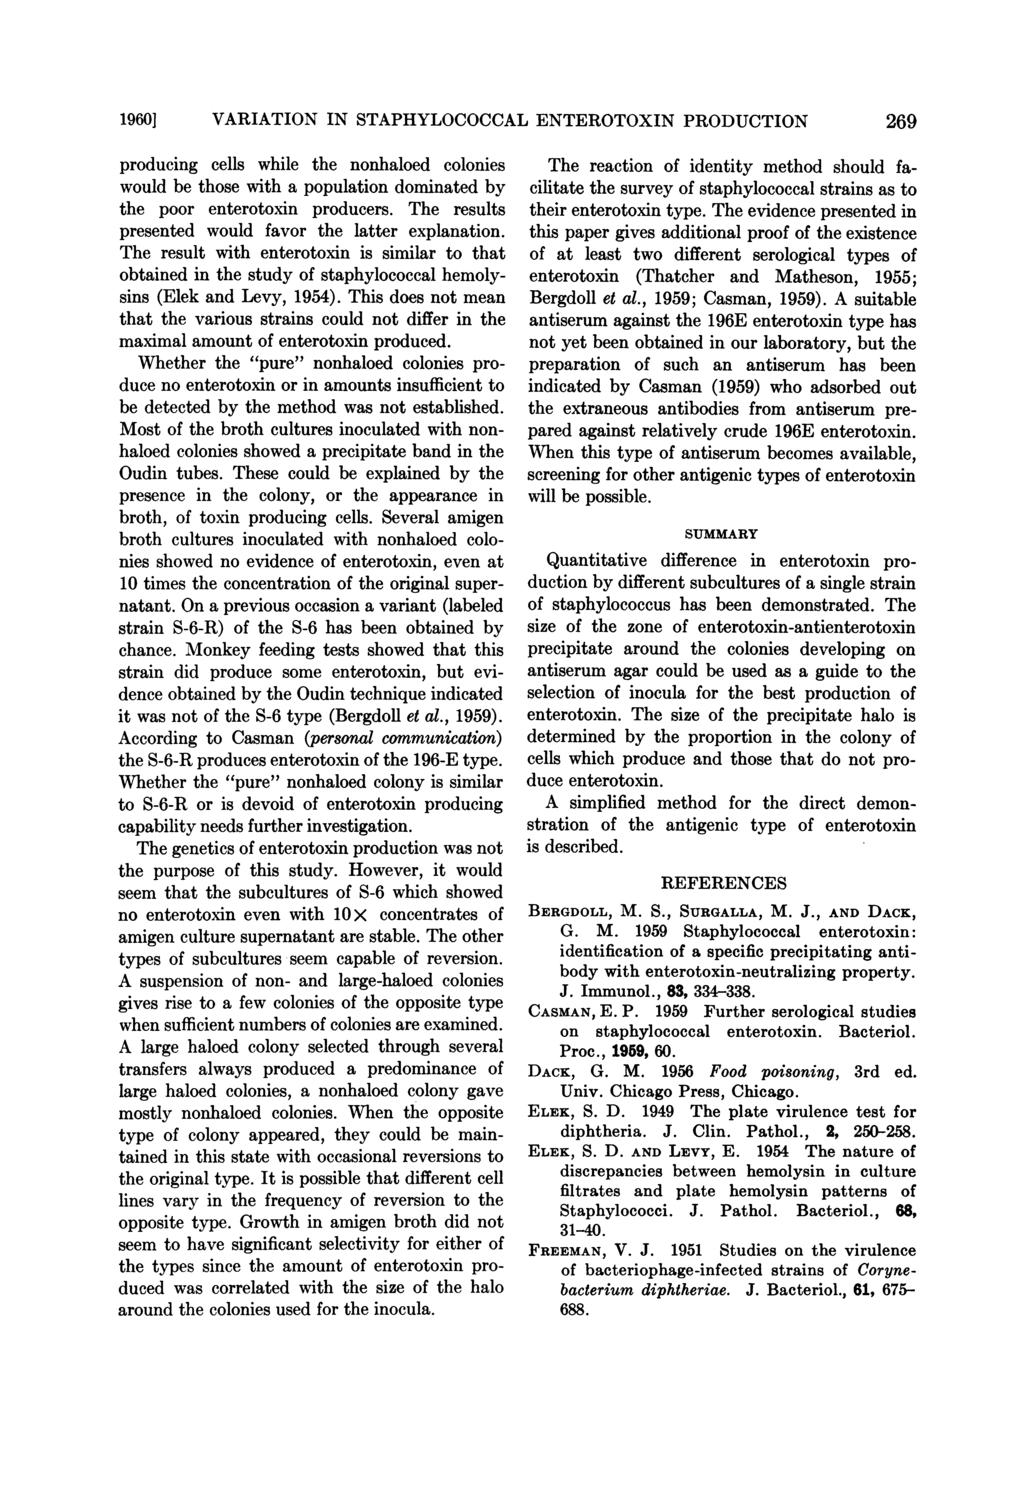 1960] VARIATION IN STAPHYLOCOCCAL ENTEROTOXIN PRODUCTION producing cells while the nonhaloed colonies would be those with a population dominated by the poor enterotoxin producers.